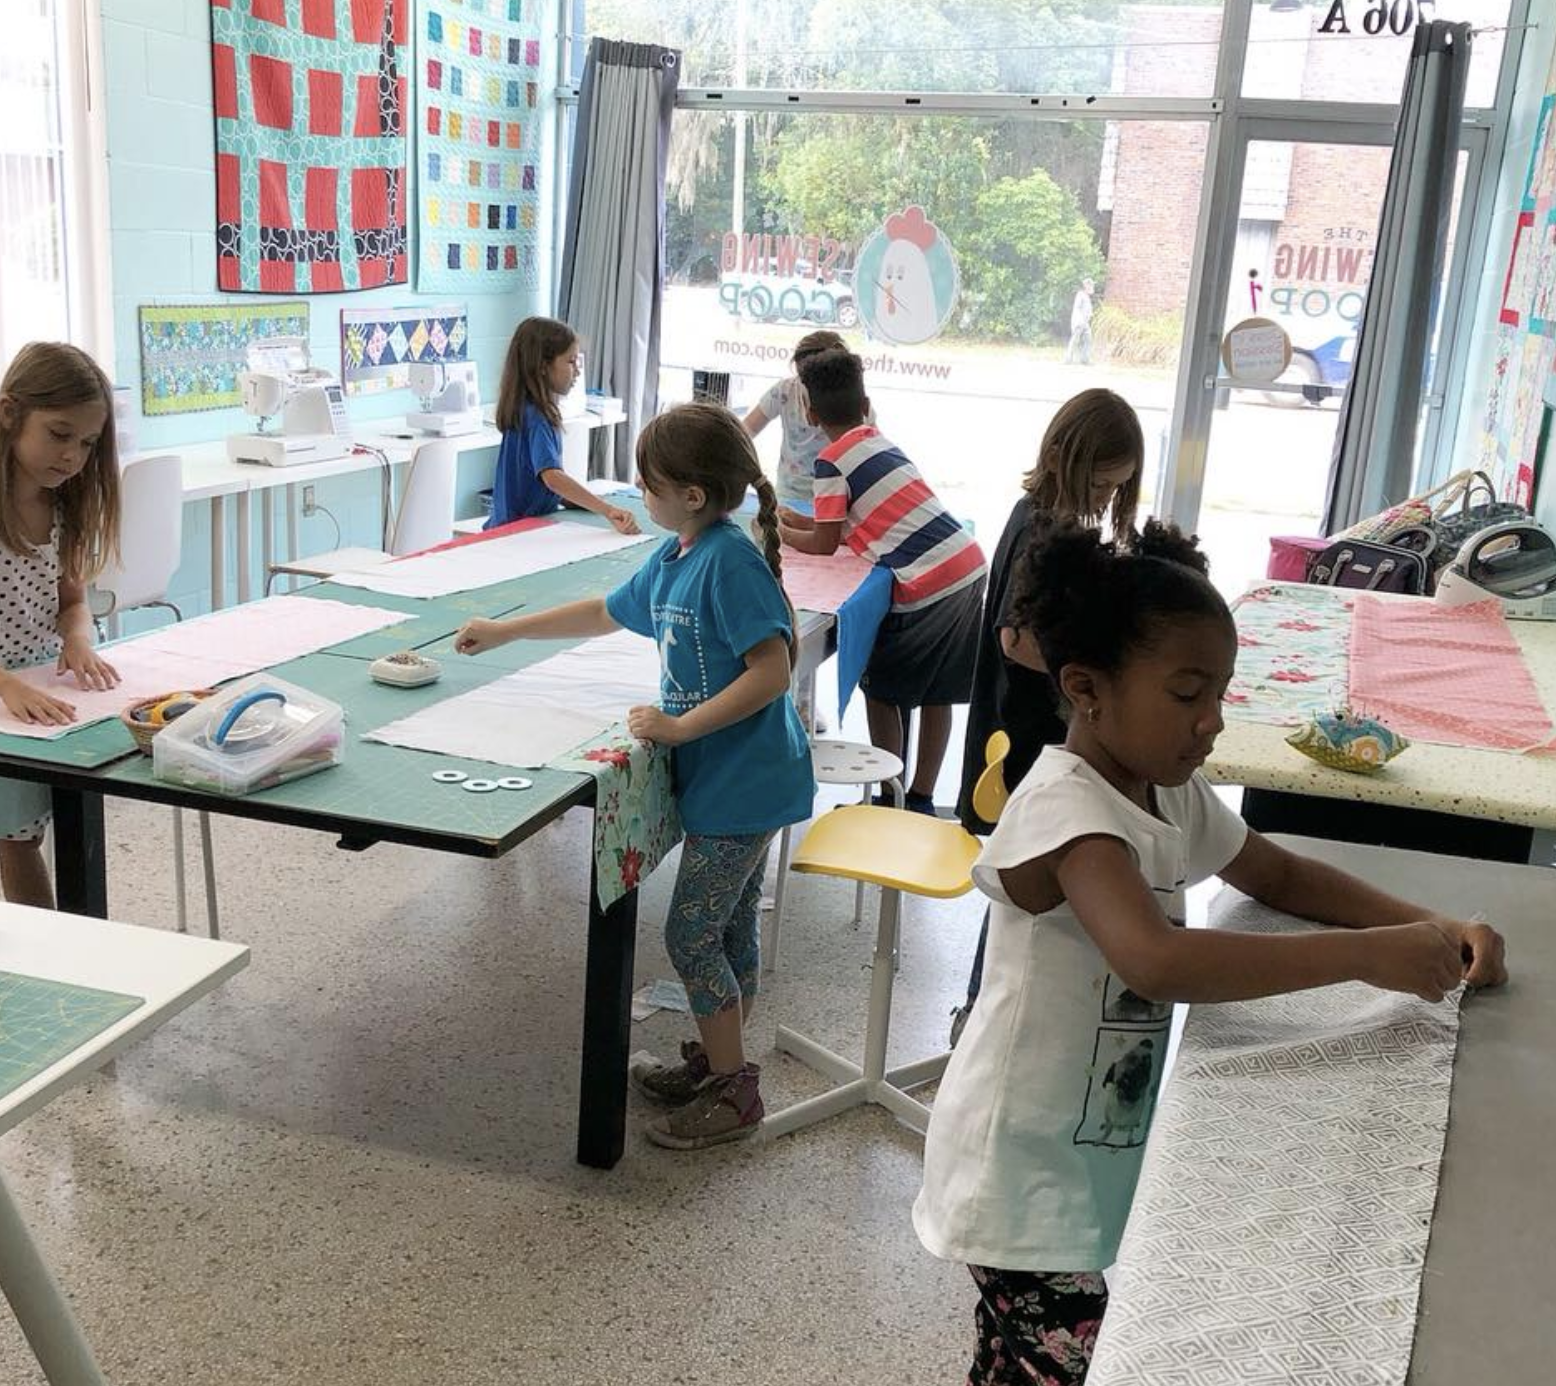 Kids Sewing Camp- Friday, July 5th: 9:00am- 2:00pm 